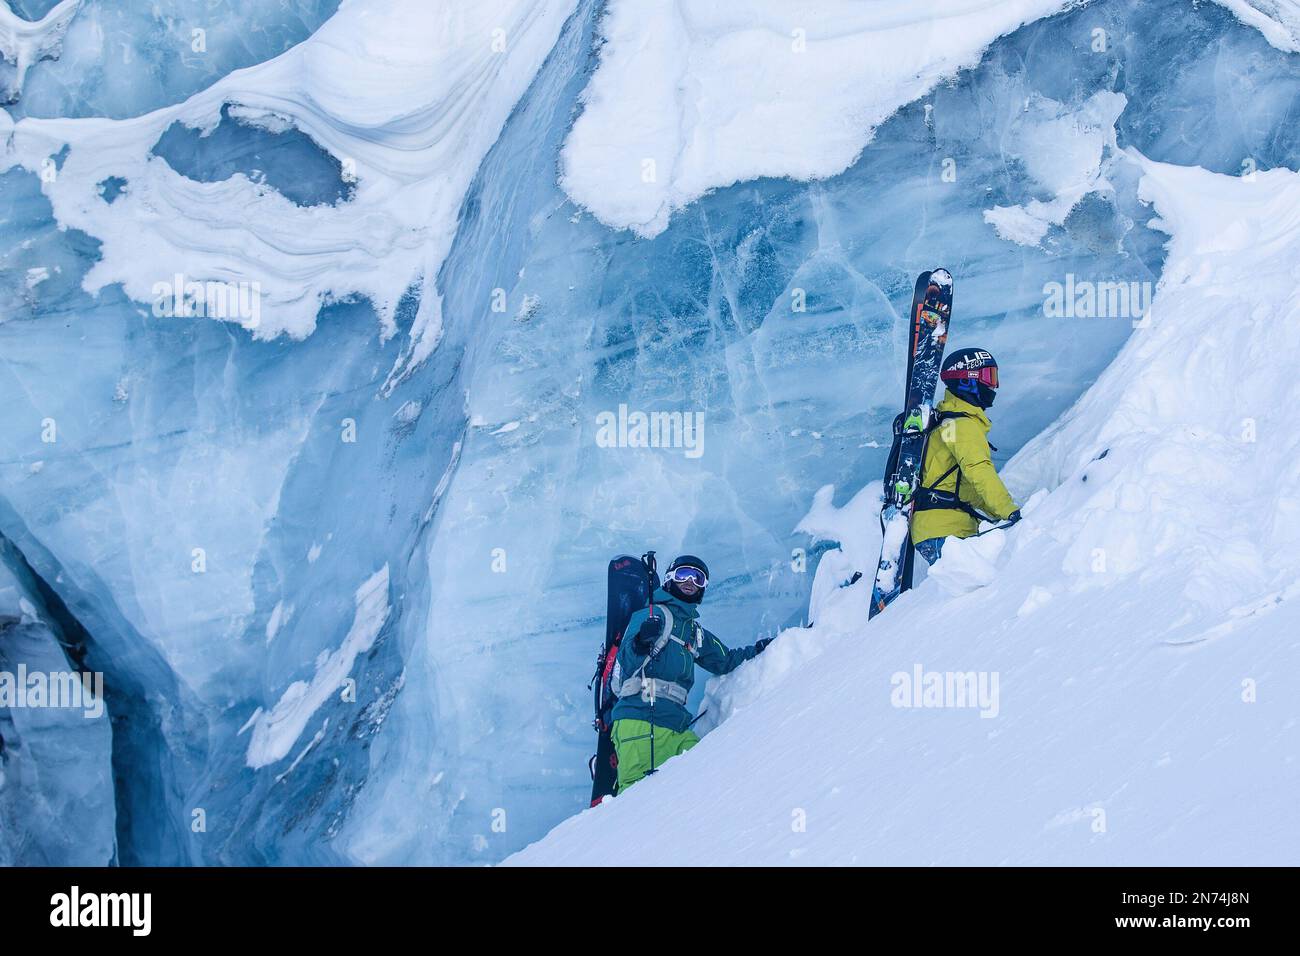 Two professional snowboarders and skiers explore and ski a crevasse / ice cave high up on the Pitztal glacier, Pitztal, Tyrol, Austria Stock Photo